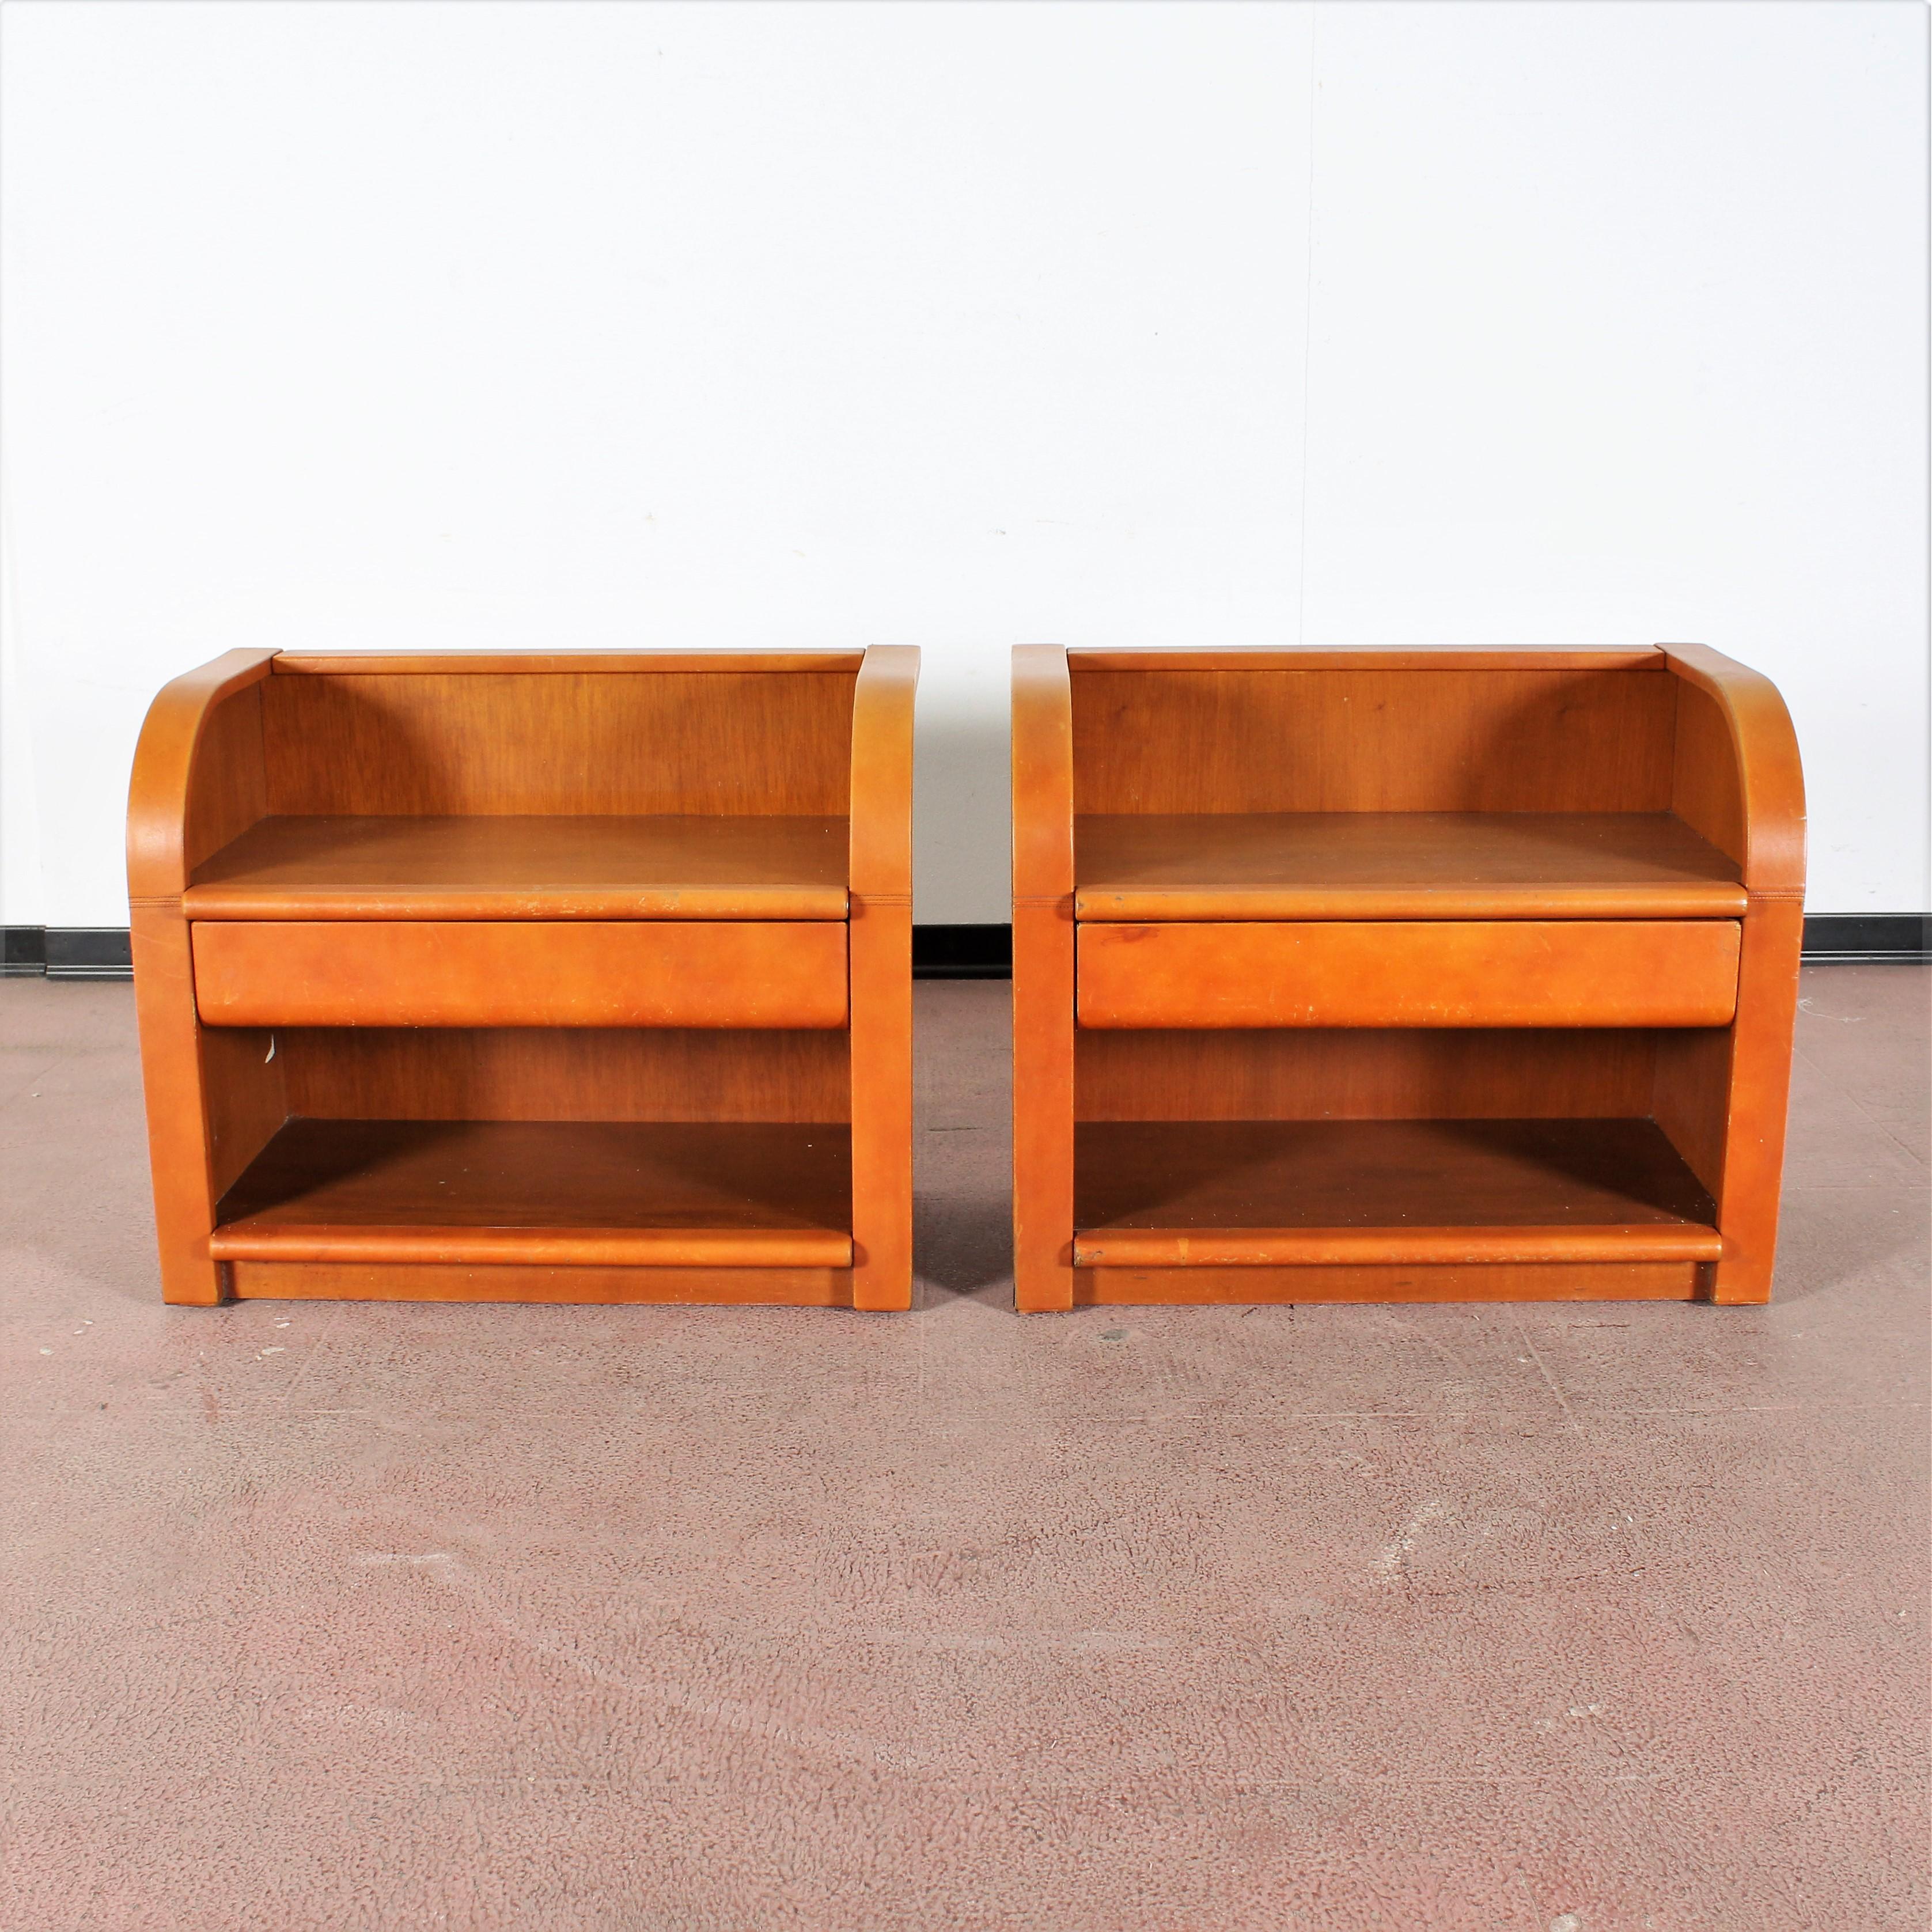 Pair of beautiful nightstands with drawer, in wood with leather upholstery, by Poltrona Frau, Italy, 1960s. Label with the 